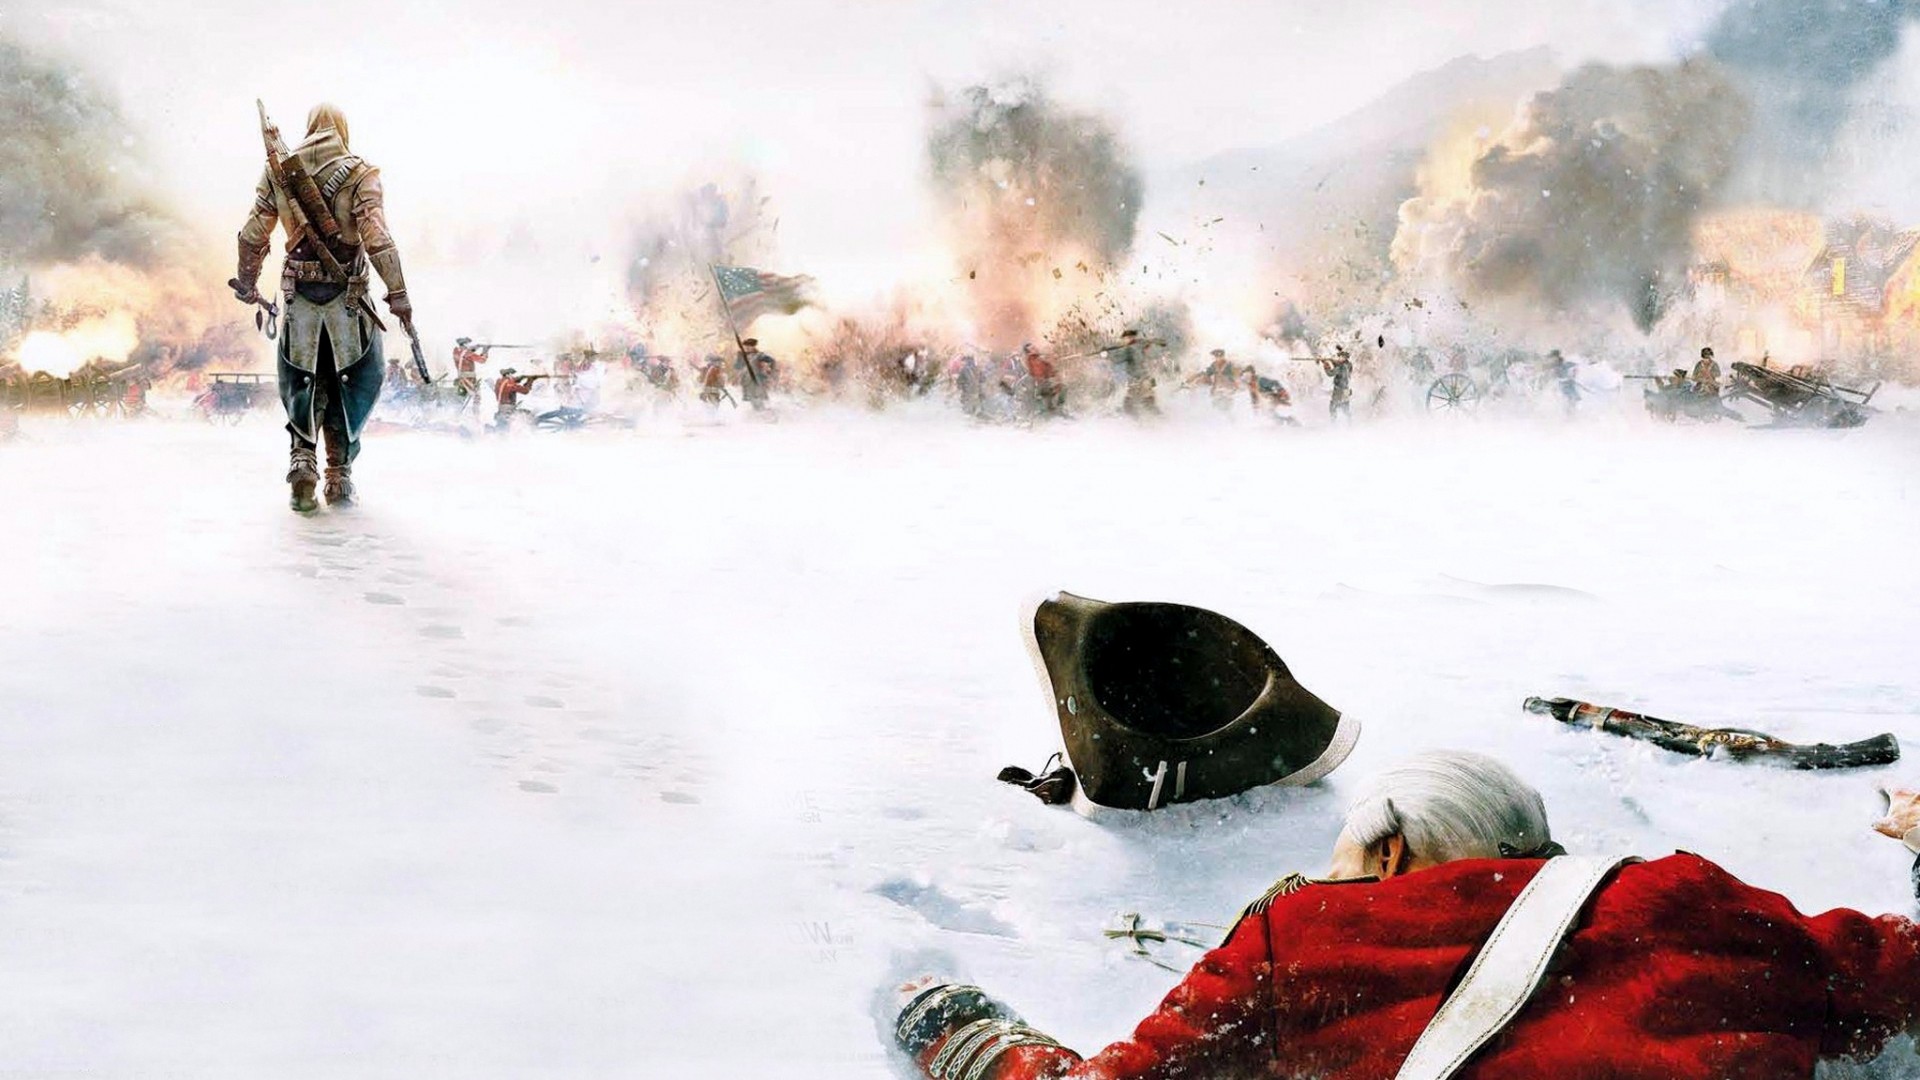 General 1920x1080 Assassin's Creed III Conner Kenway Assassin's Creed video games PC gaming